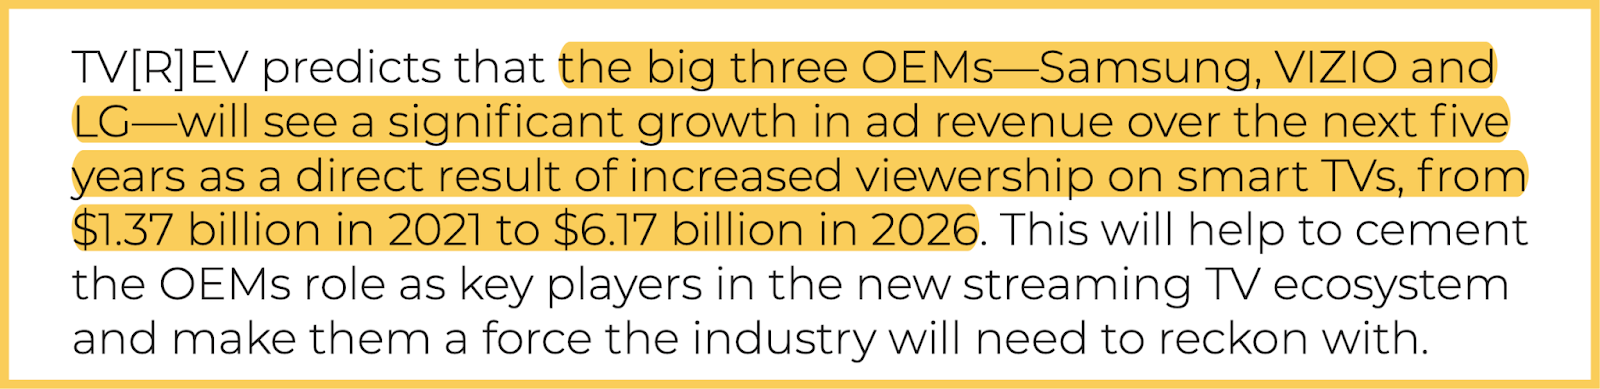 Smart TV ad revenue projections from TV[R]EV analysts. Source: “The Emerging Smart TV Ecosystem,” page 4 (highlights added by me)